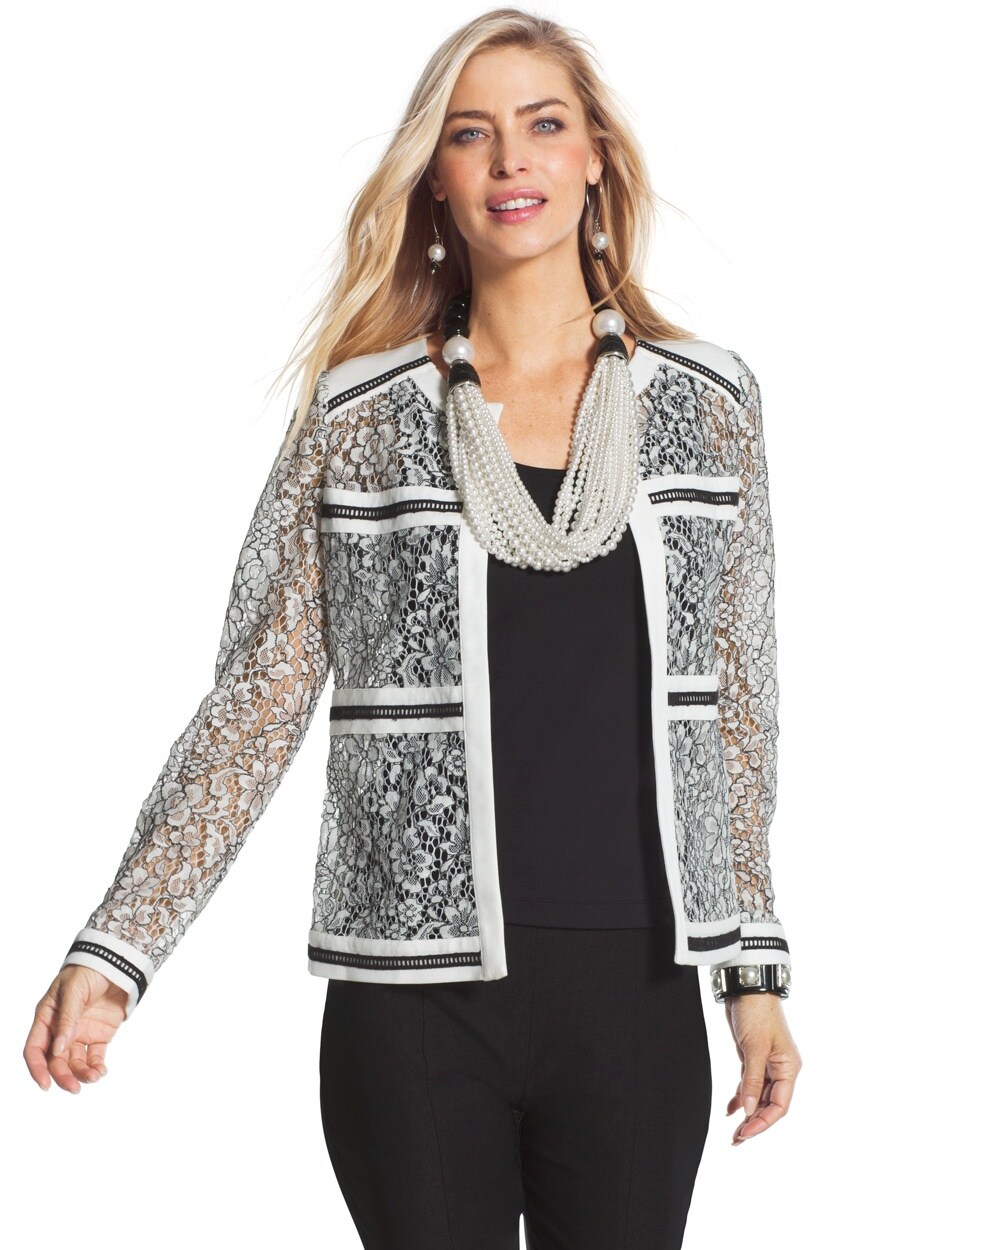 Two-Toned Lace Jacket